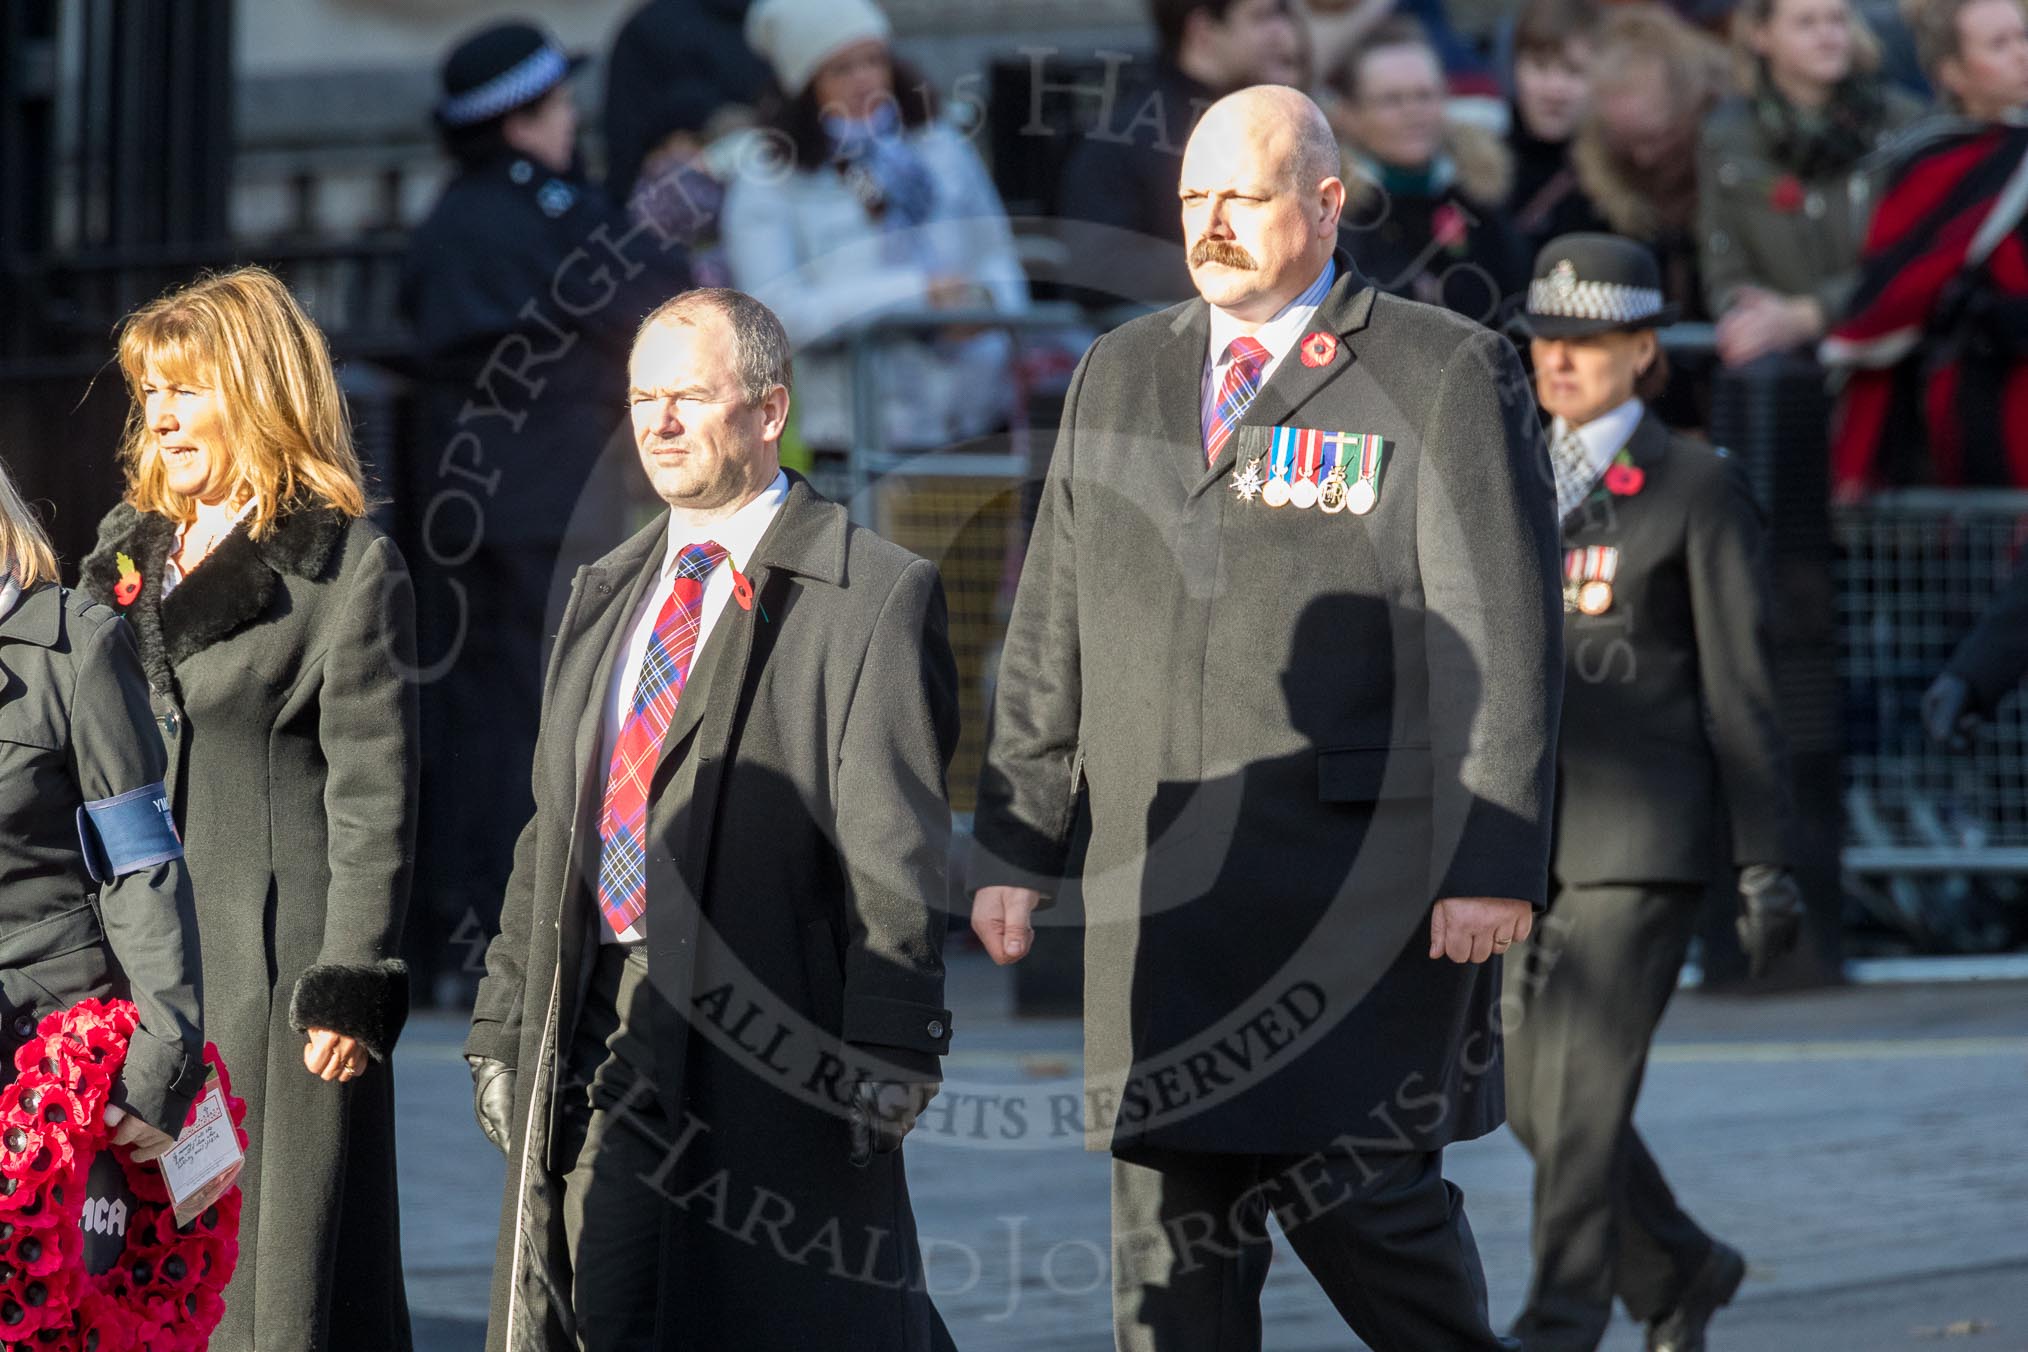 March Past, Remembrance Sunday at the Cenotaph 2016: M38 Cheshire Special Constabulary.
Cenotaph, Whitehall, London SW1,
London,
Greater London,
United Kingdom,
on 13 November 2016 at 13:19, image #2912